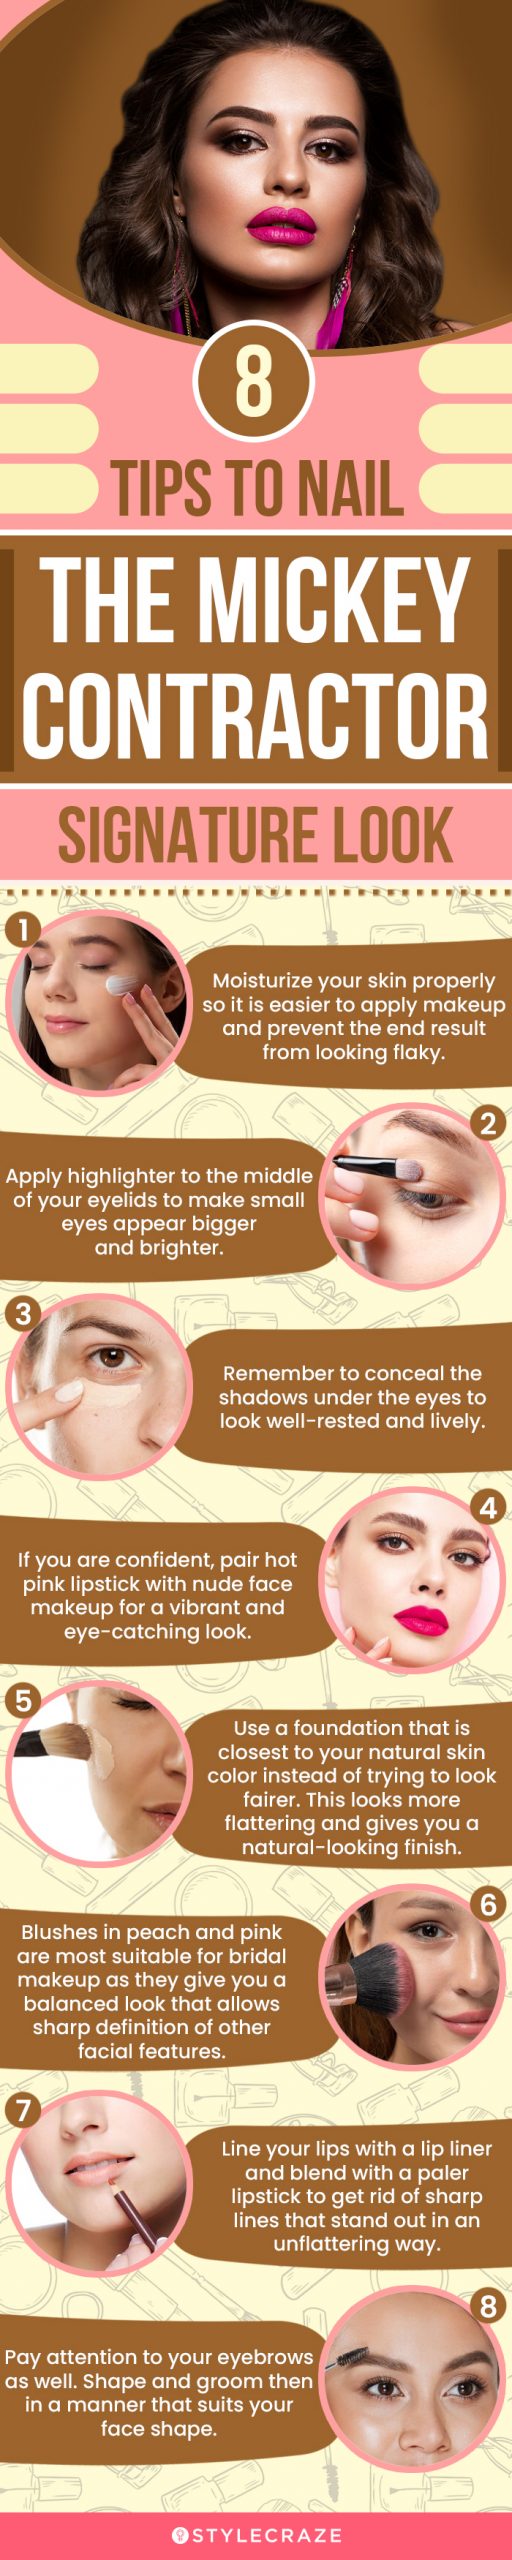 8 tips to nail the mickey contractor signature look(infographic)